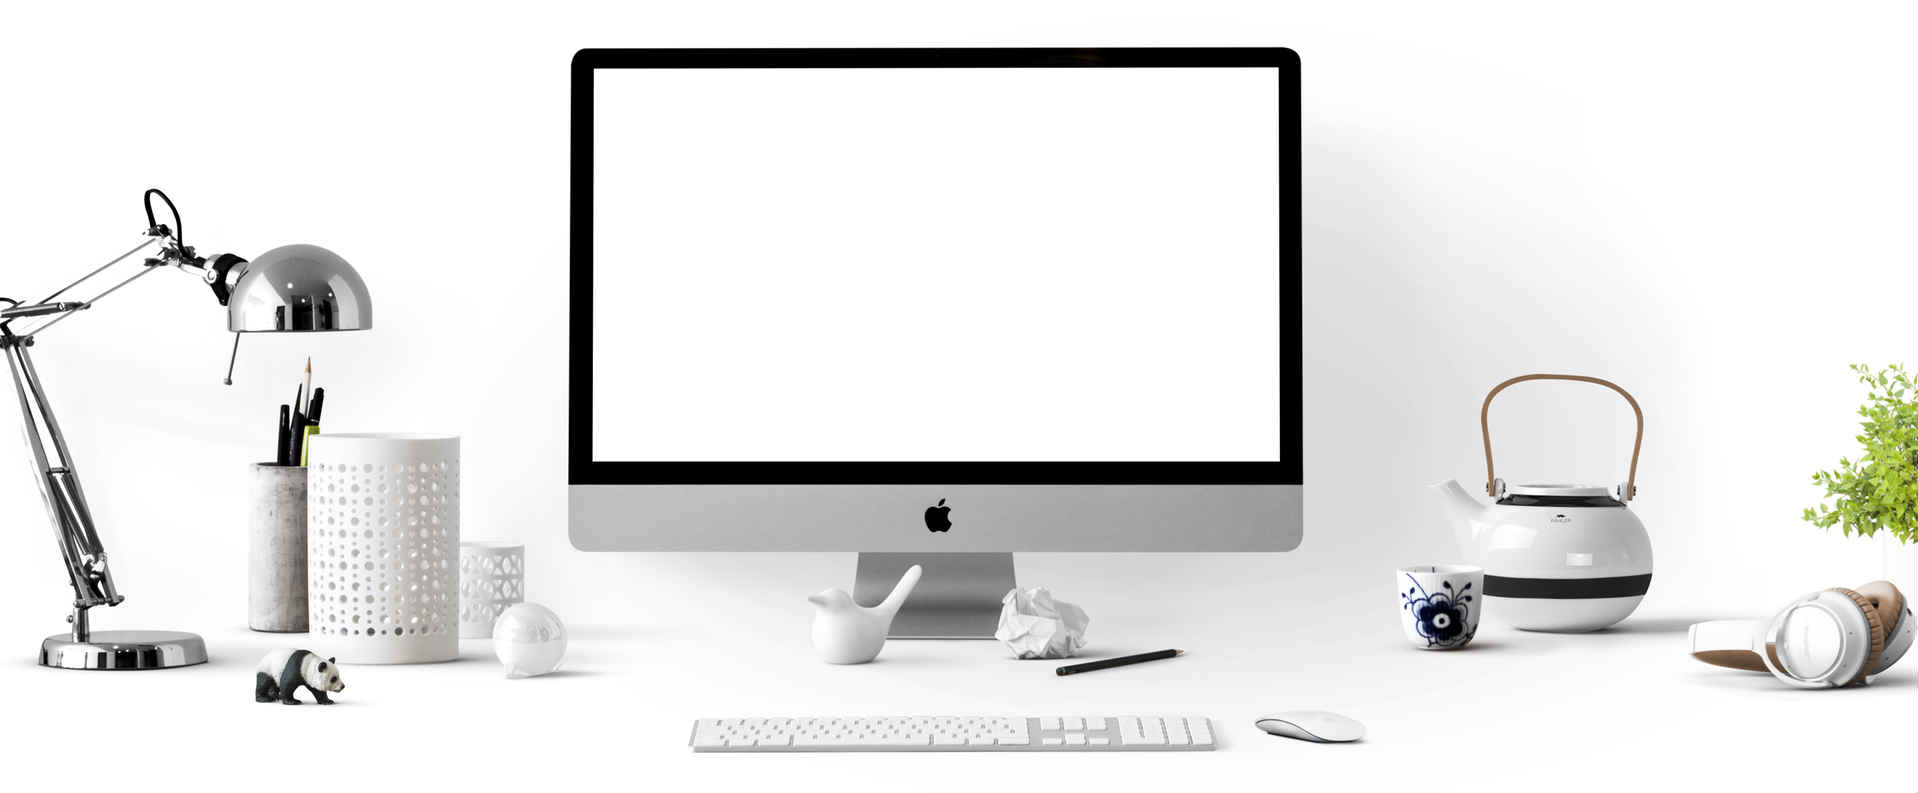 Dublin Accountants image of an apple screen and other white objects on a white desk